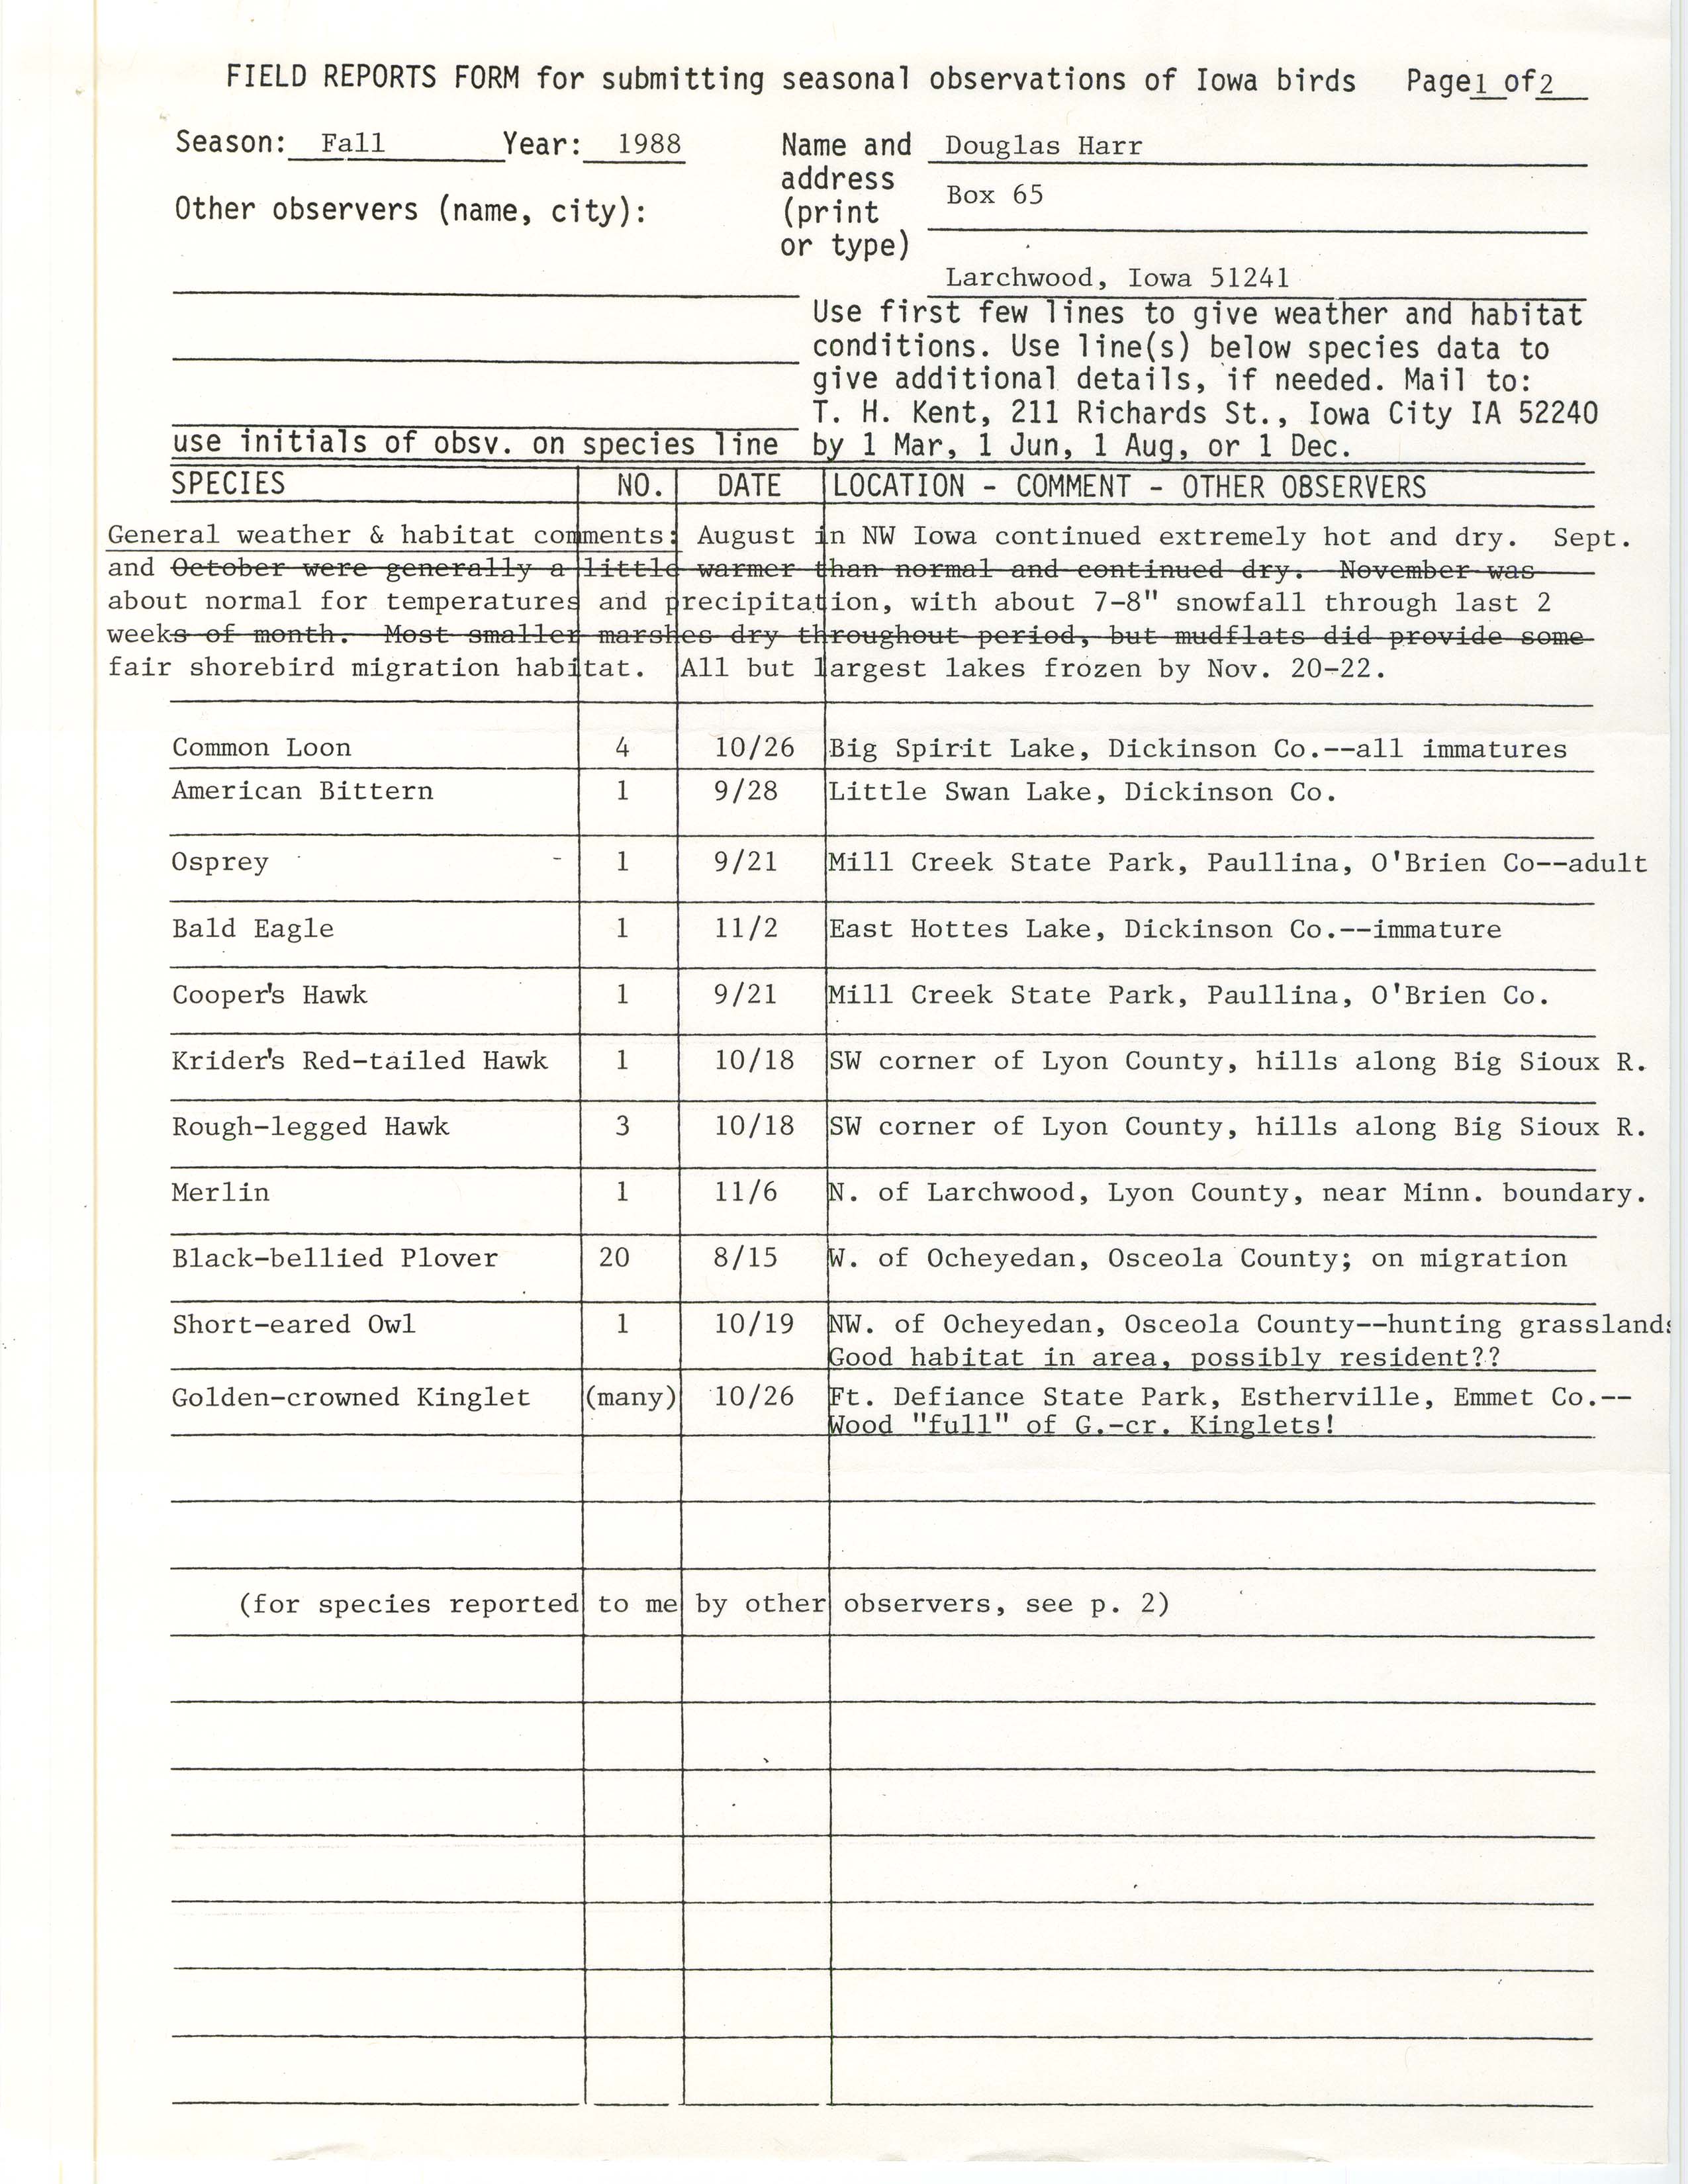 Field reports form for submitting seasonal observations of Iowa birds, Douglas C. Harr, fall 1988